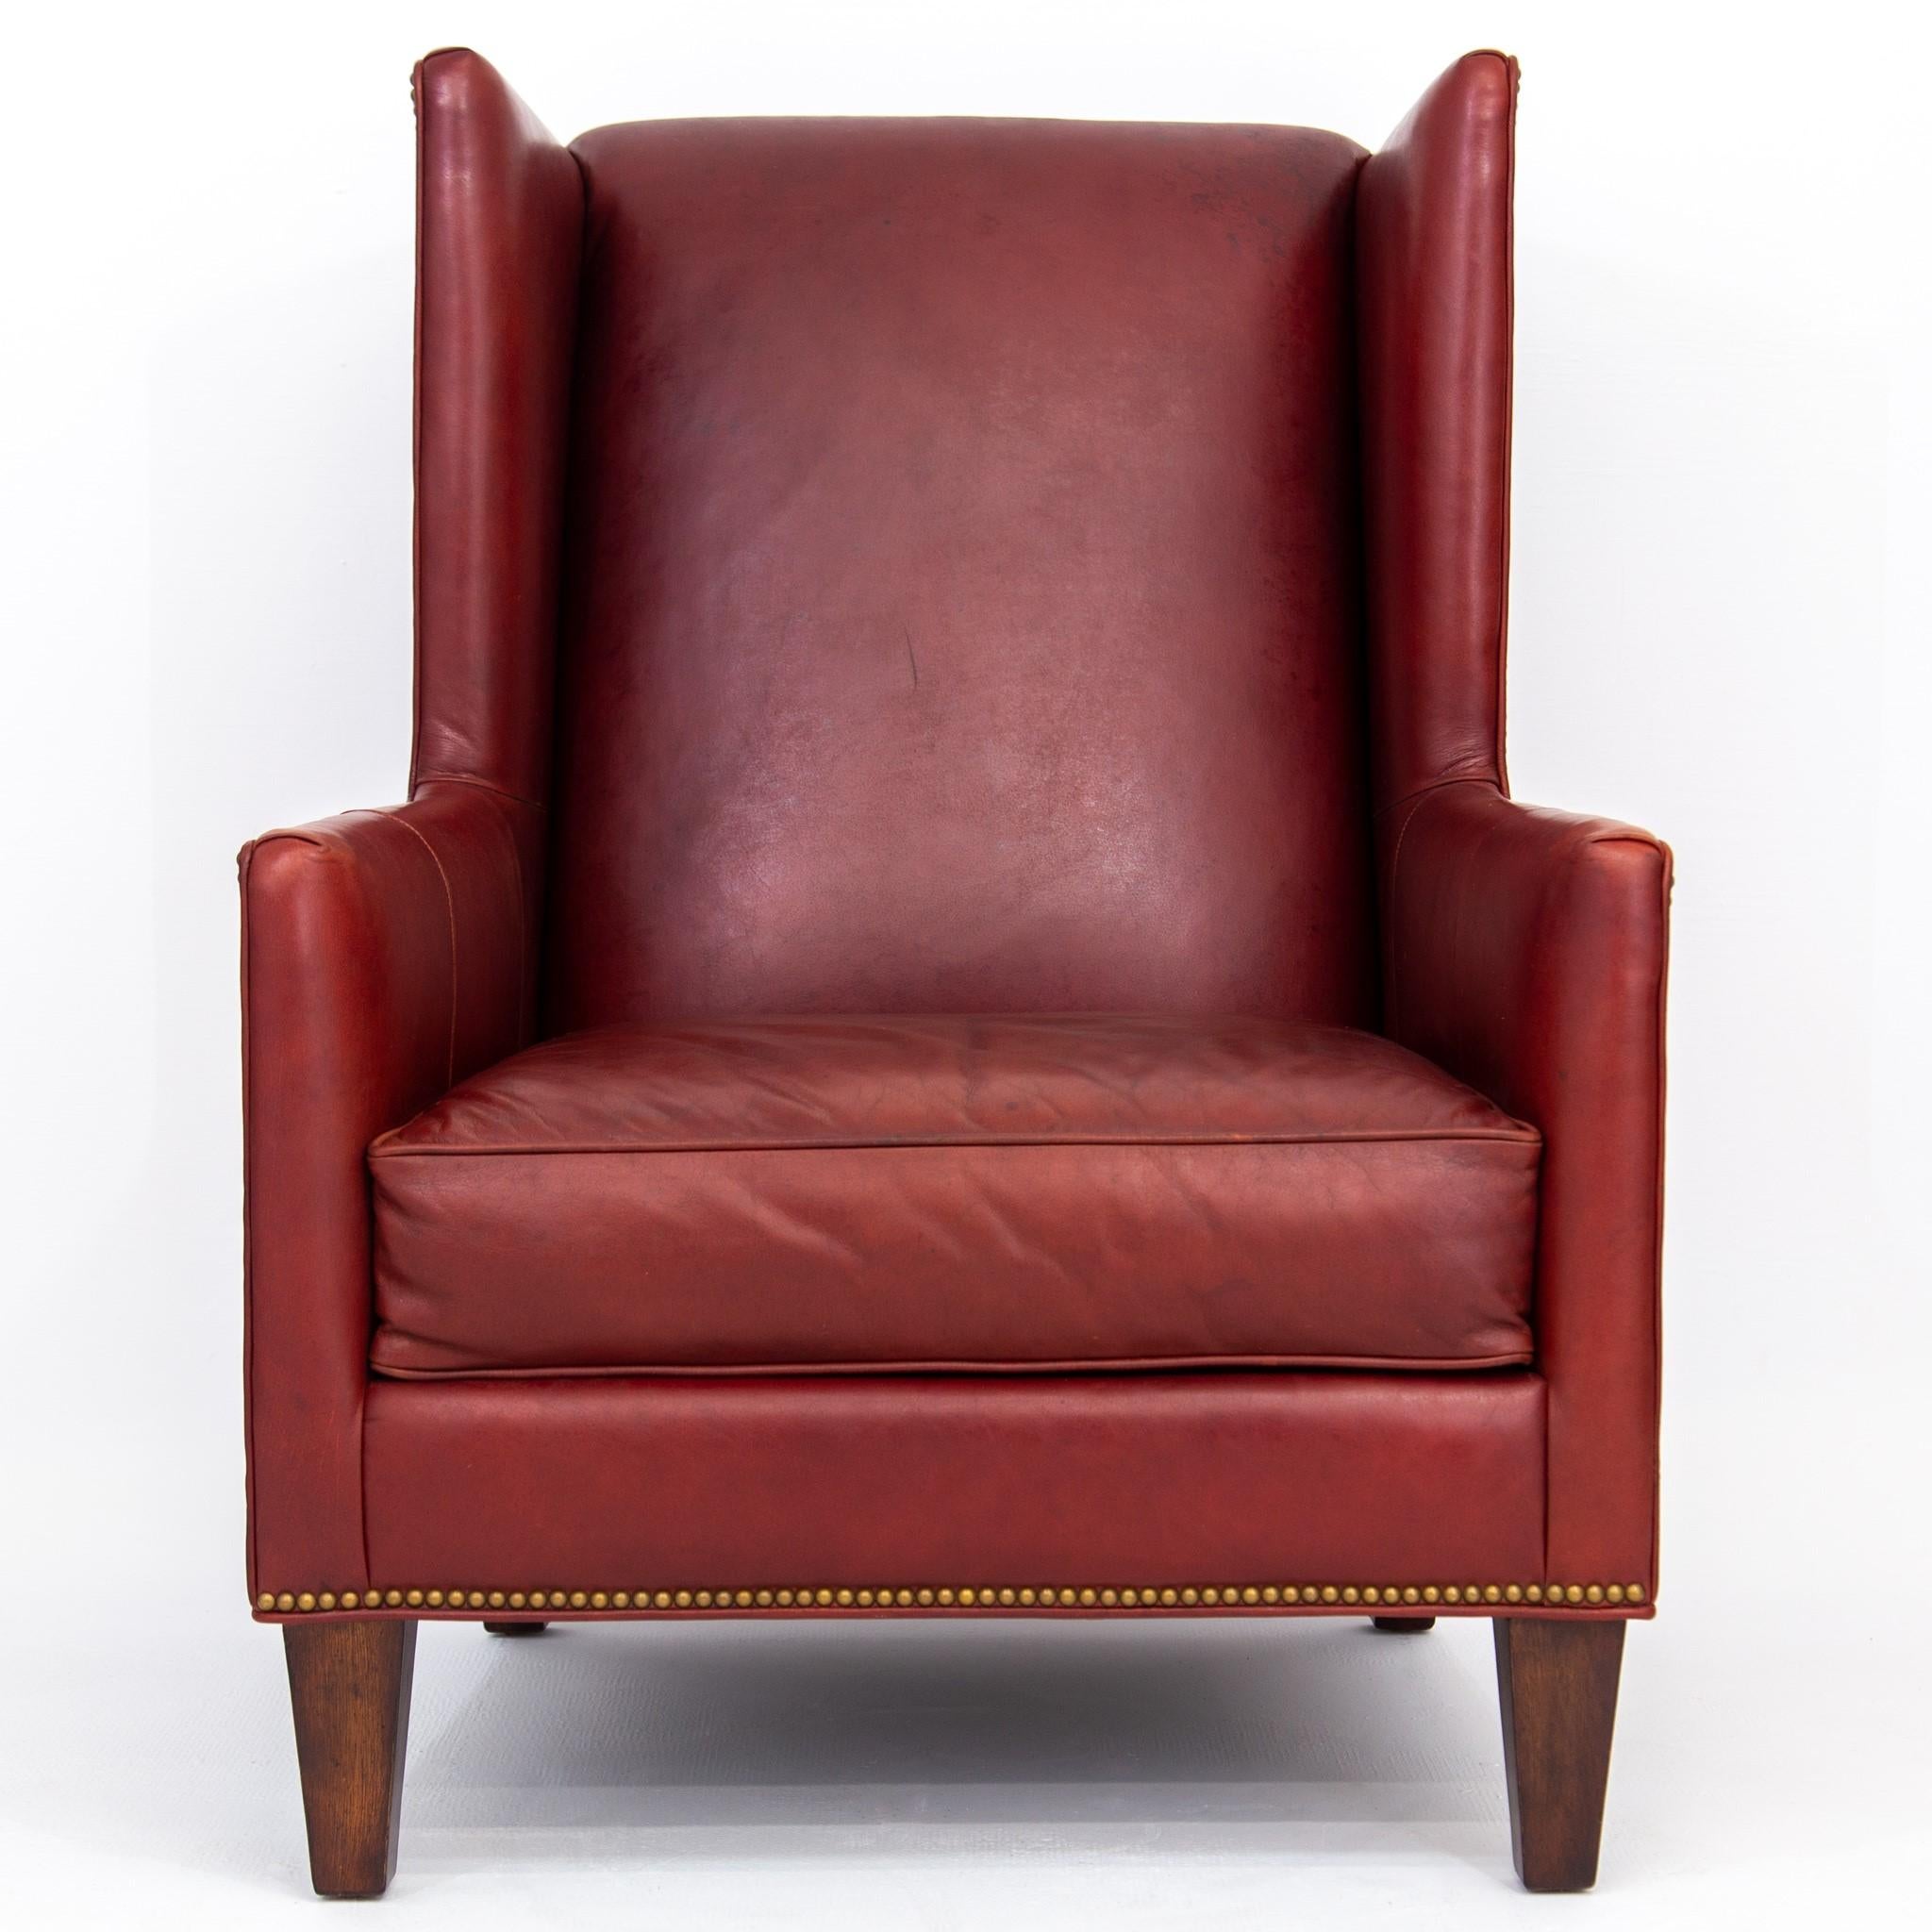 Early 21st-century large angular fireside or wing chair with deep red leather upholstery, brass nailheads and tapered square walnut feet by Massoud. Meticulous craftsmanship with hardwood frame made in the USA. The leather is soft and nicely broken